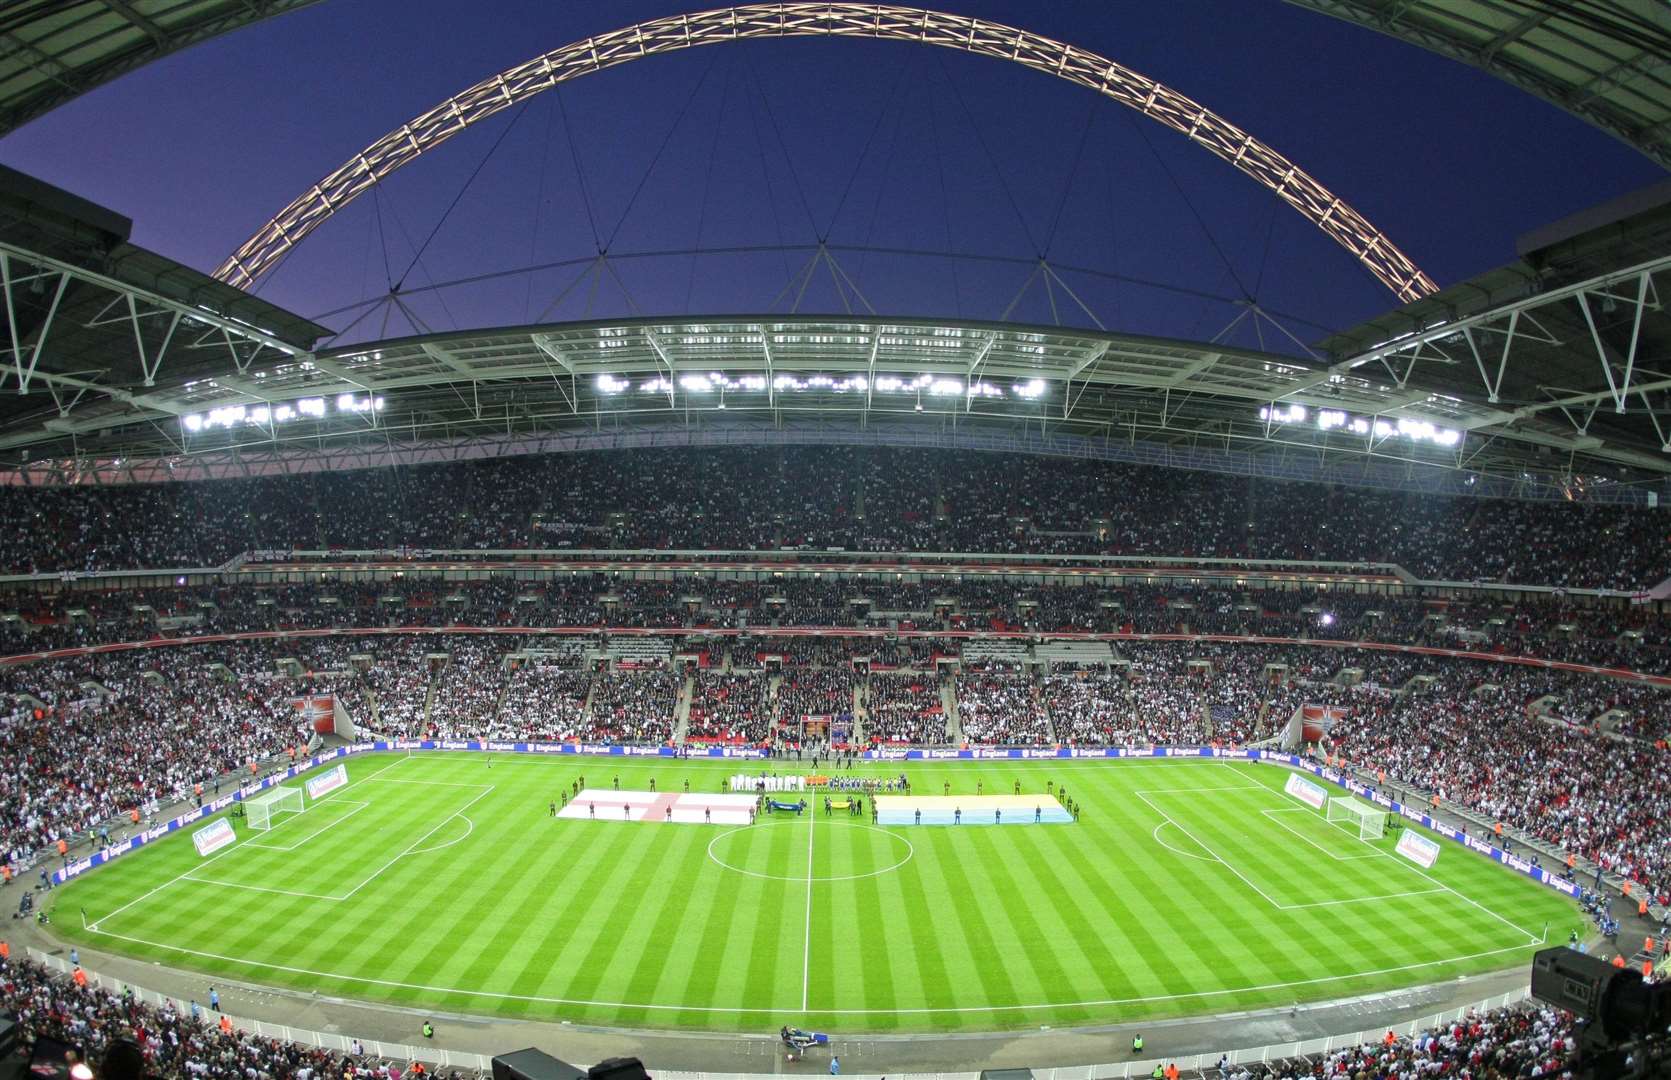 The children will watch Spurs play Cardiff at Wembley Stadium